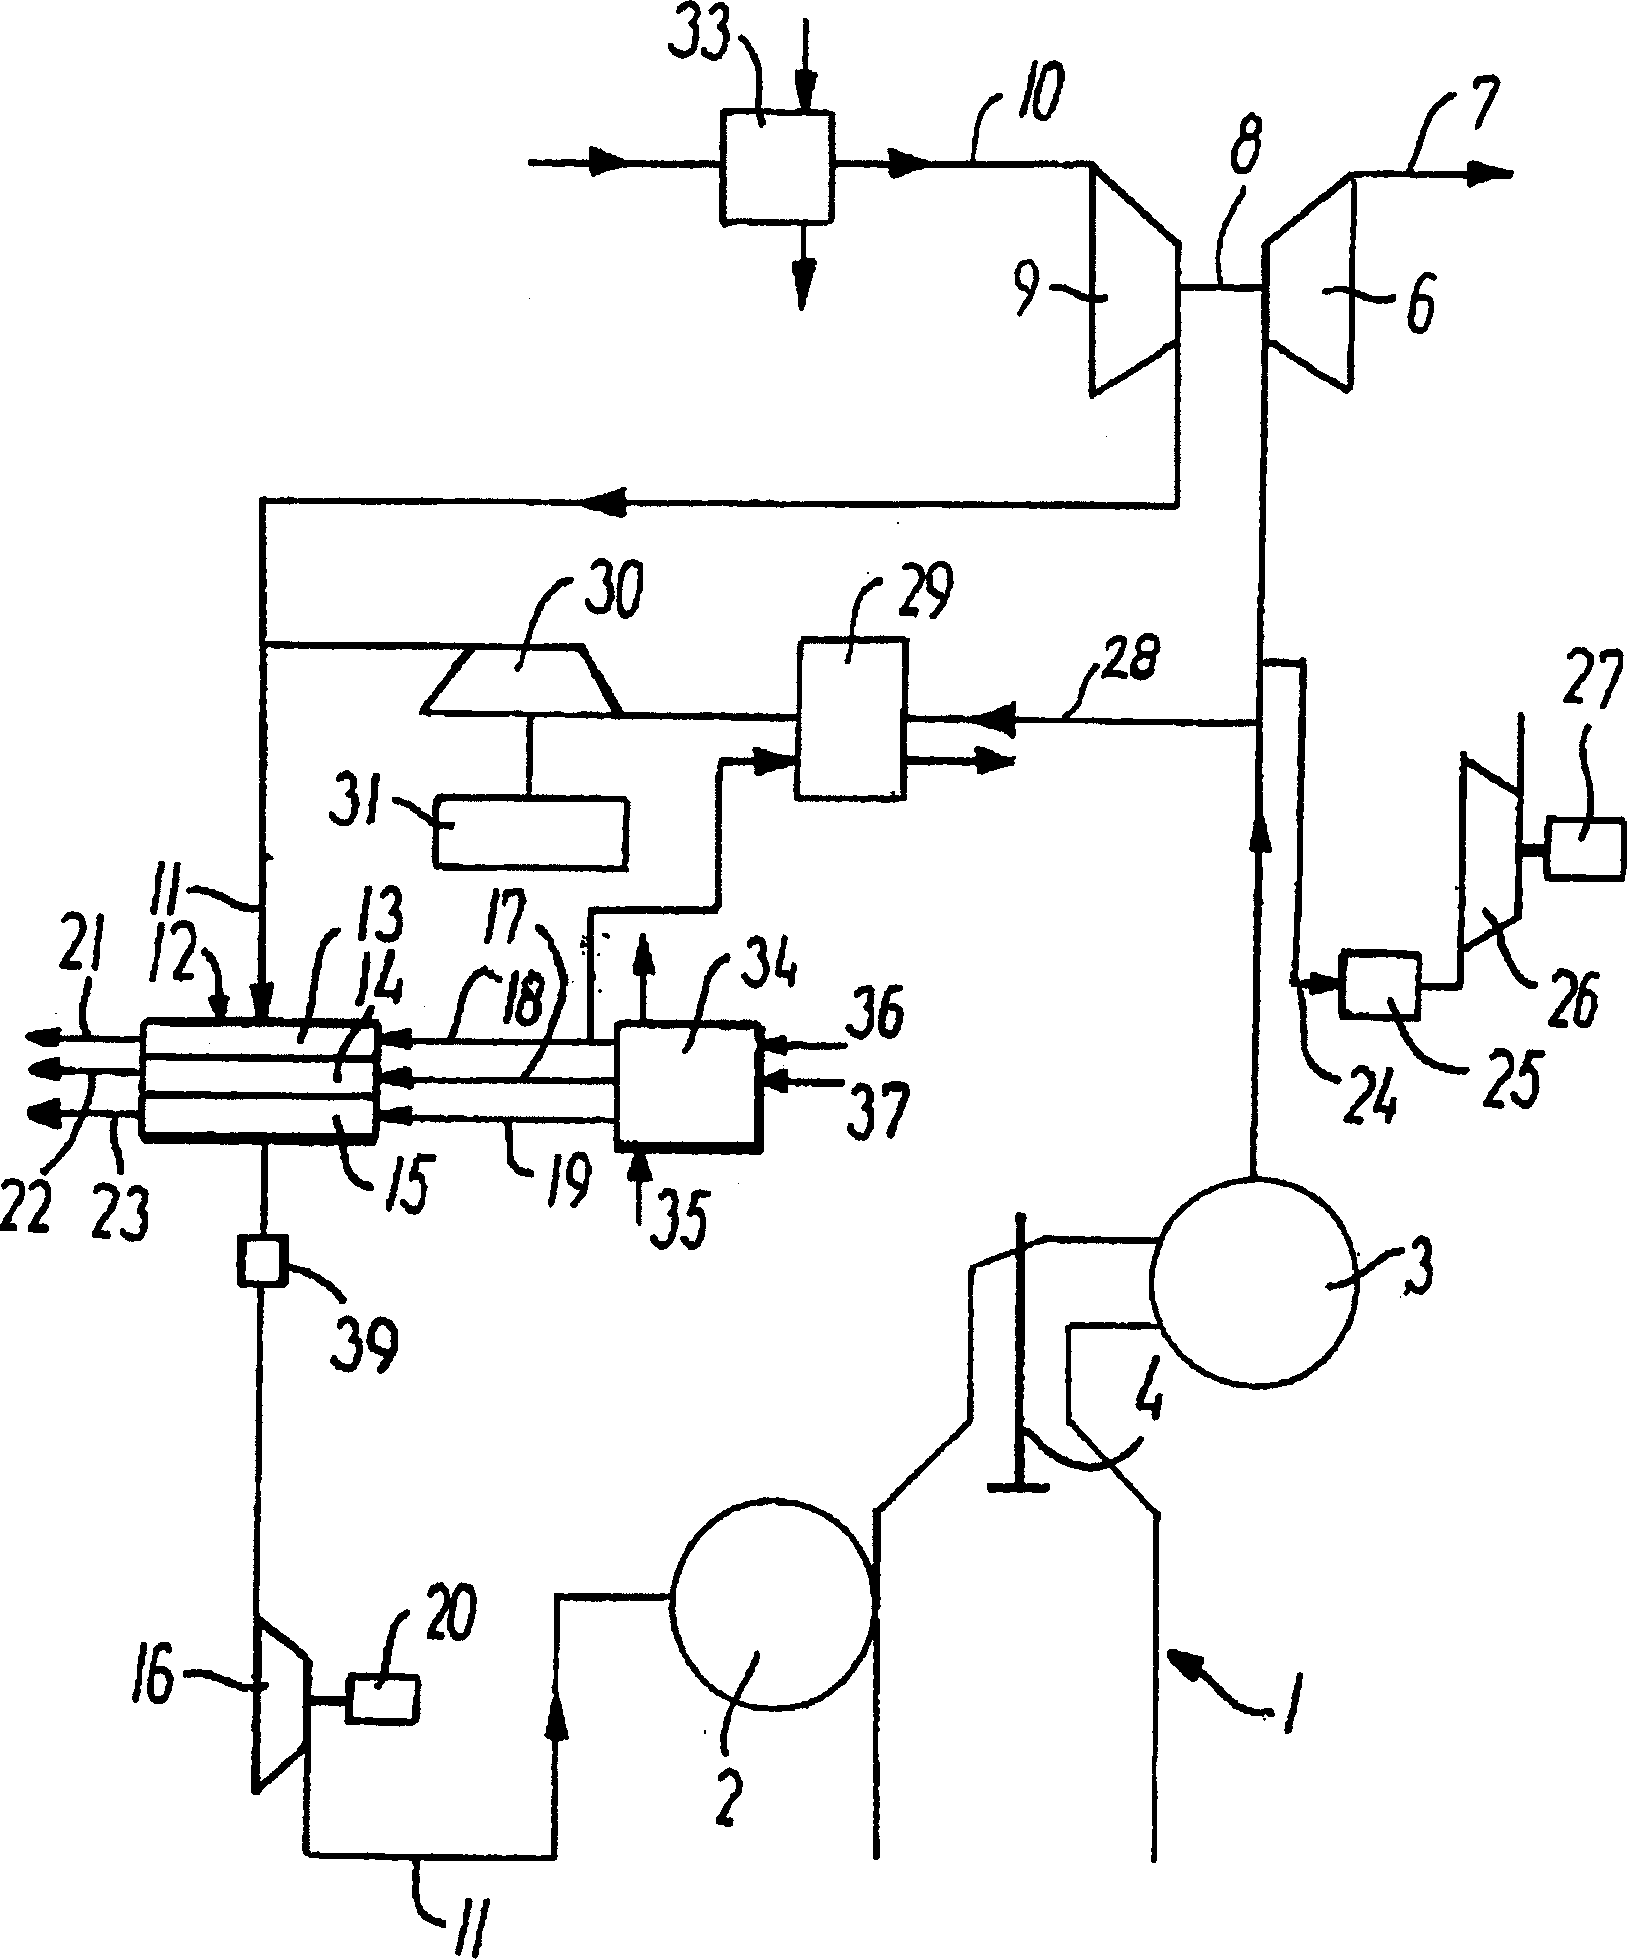 Large internal combustion engine with supercharger